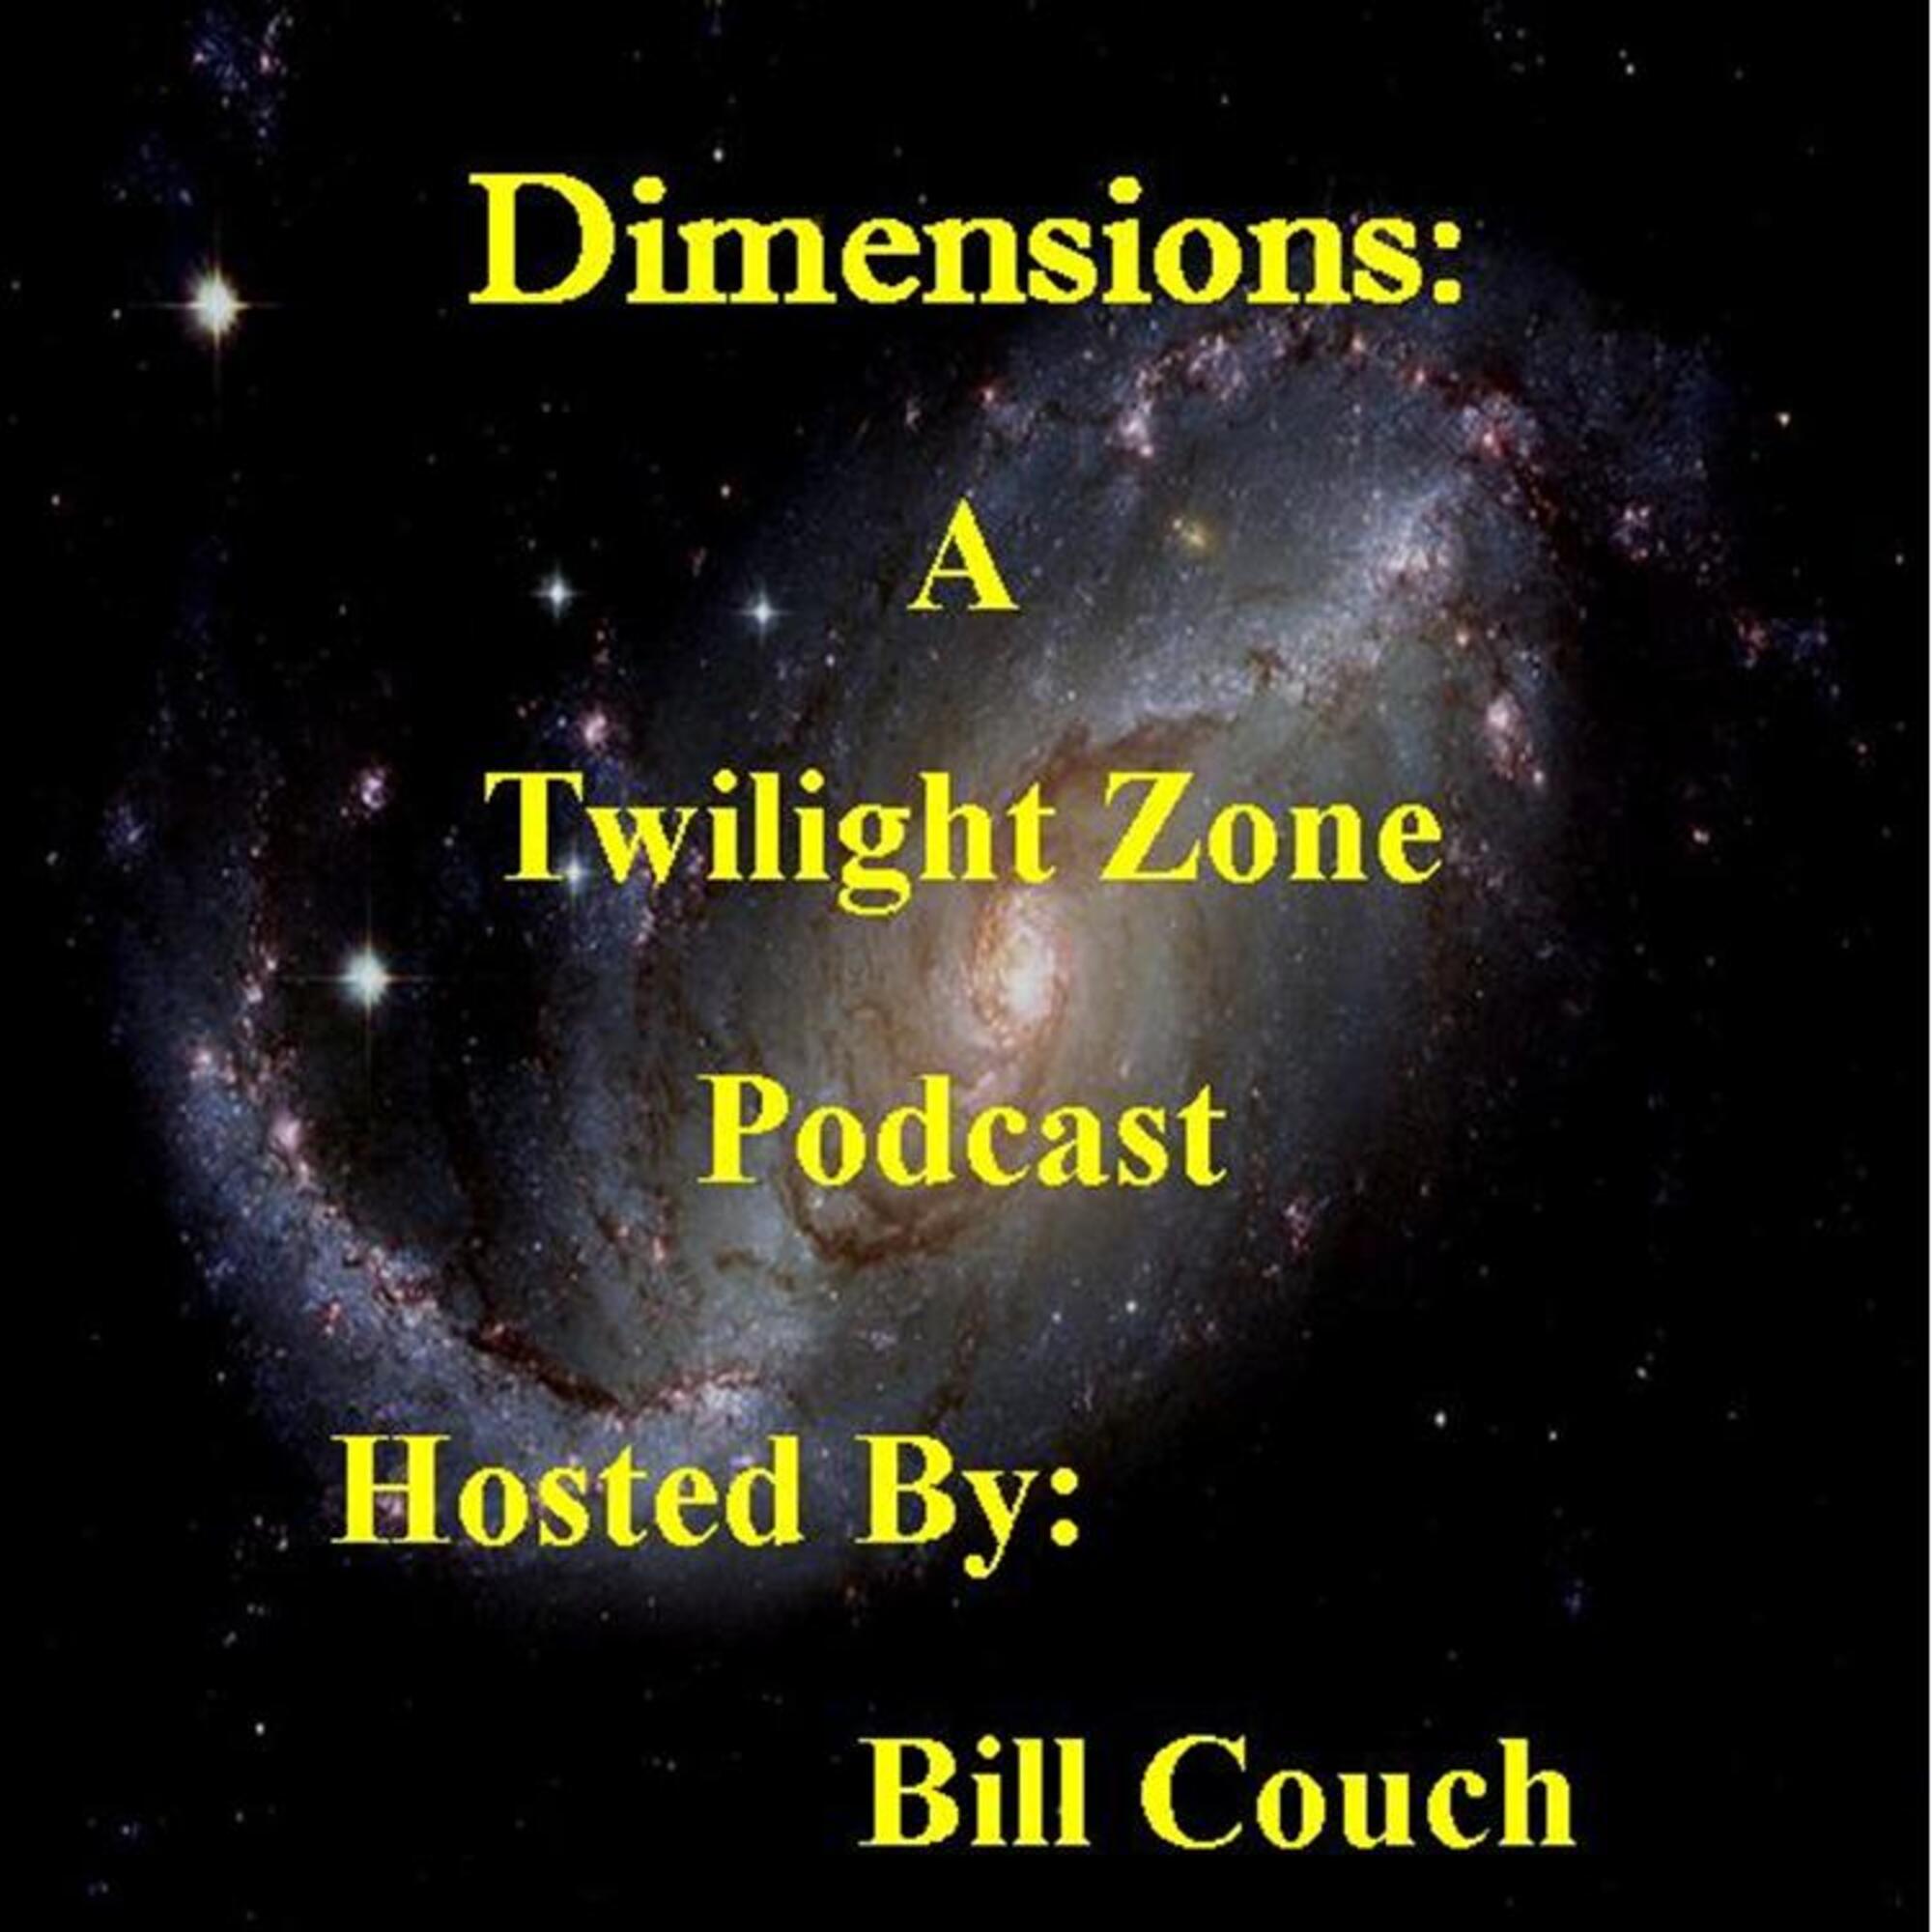 Dimensions: A Twilight Zone Podcast Season 2 Episode 14 "The Whole Truth"